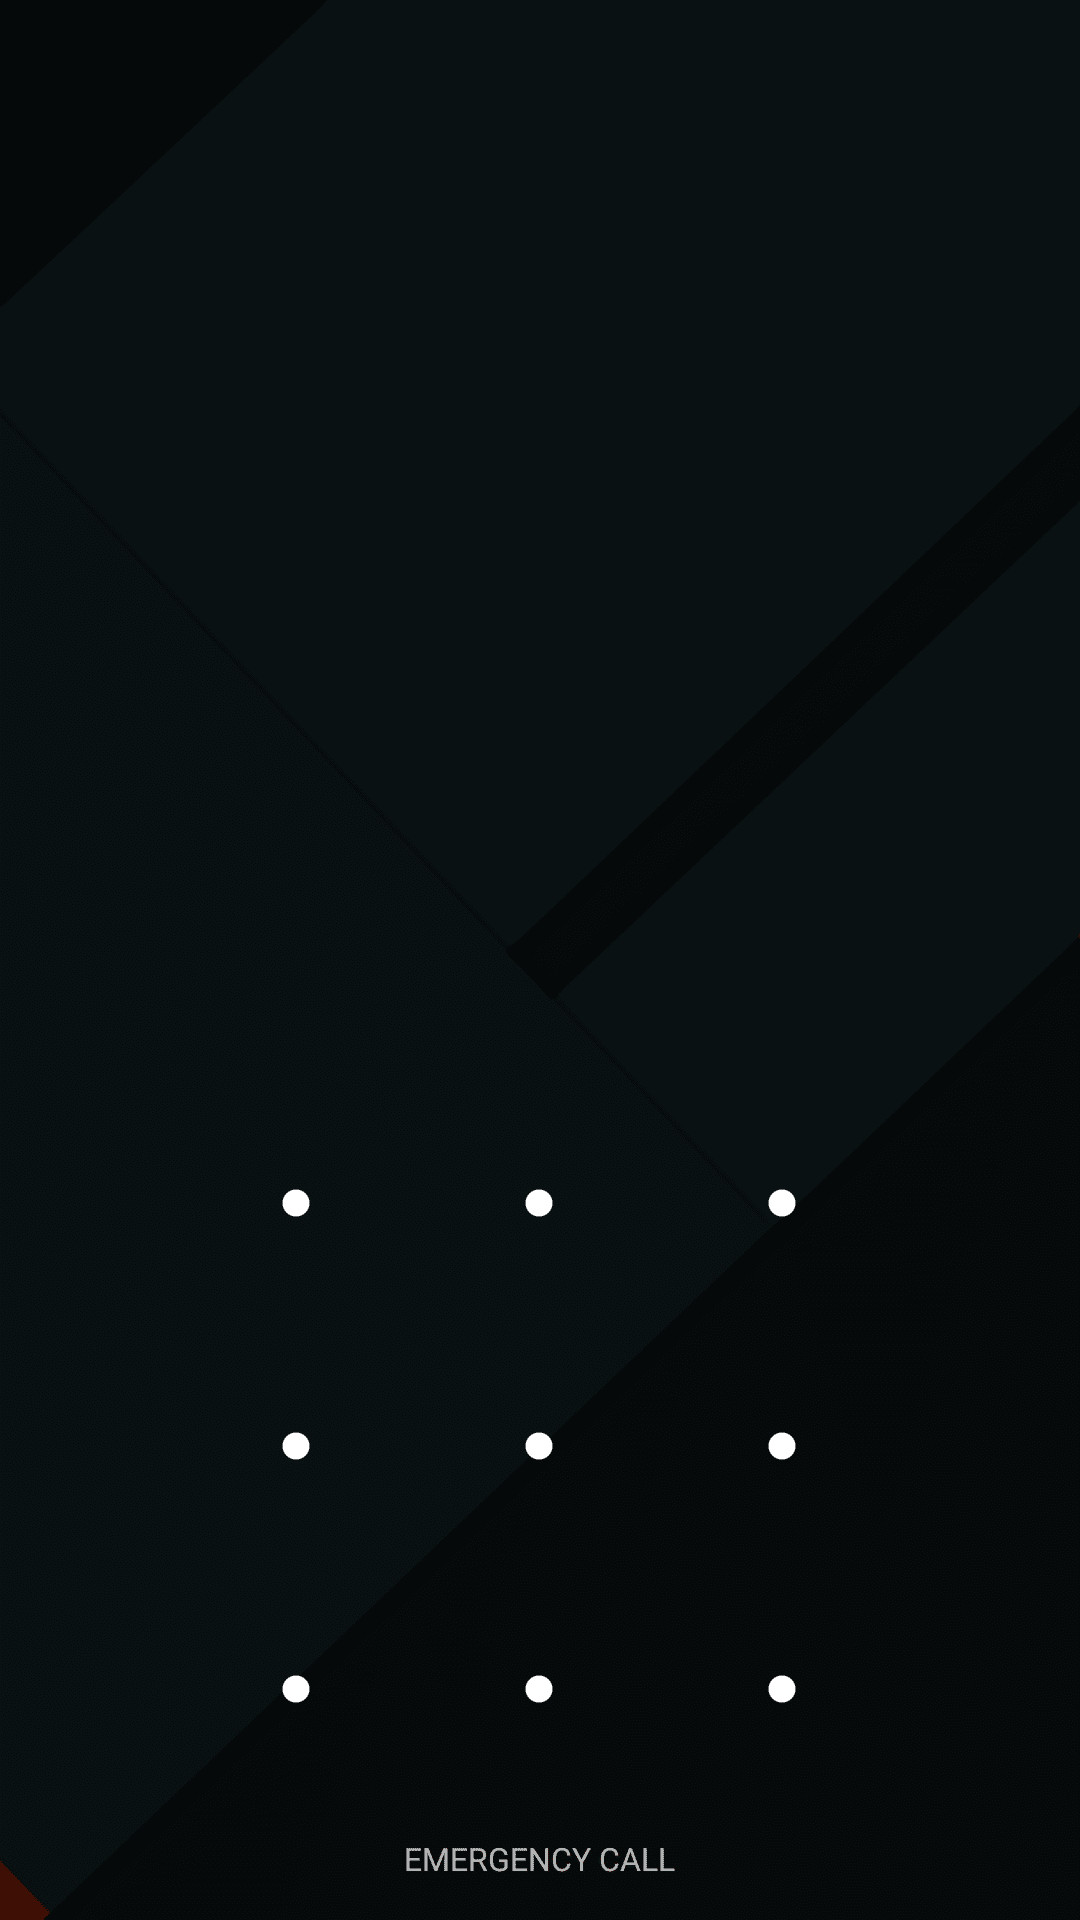 1080x1920 I see dots on my lockscreen for pattern lock...not sure about your set up.